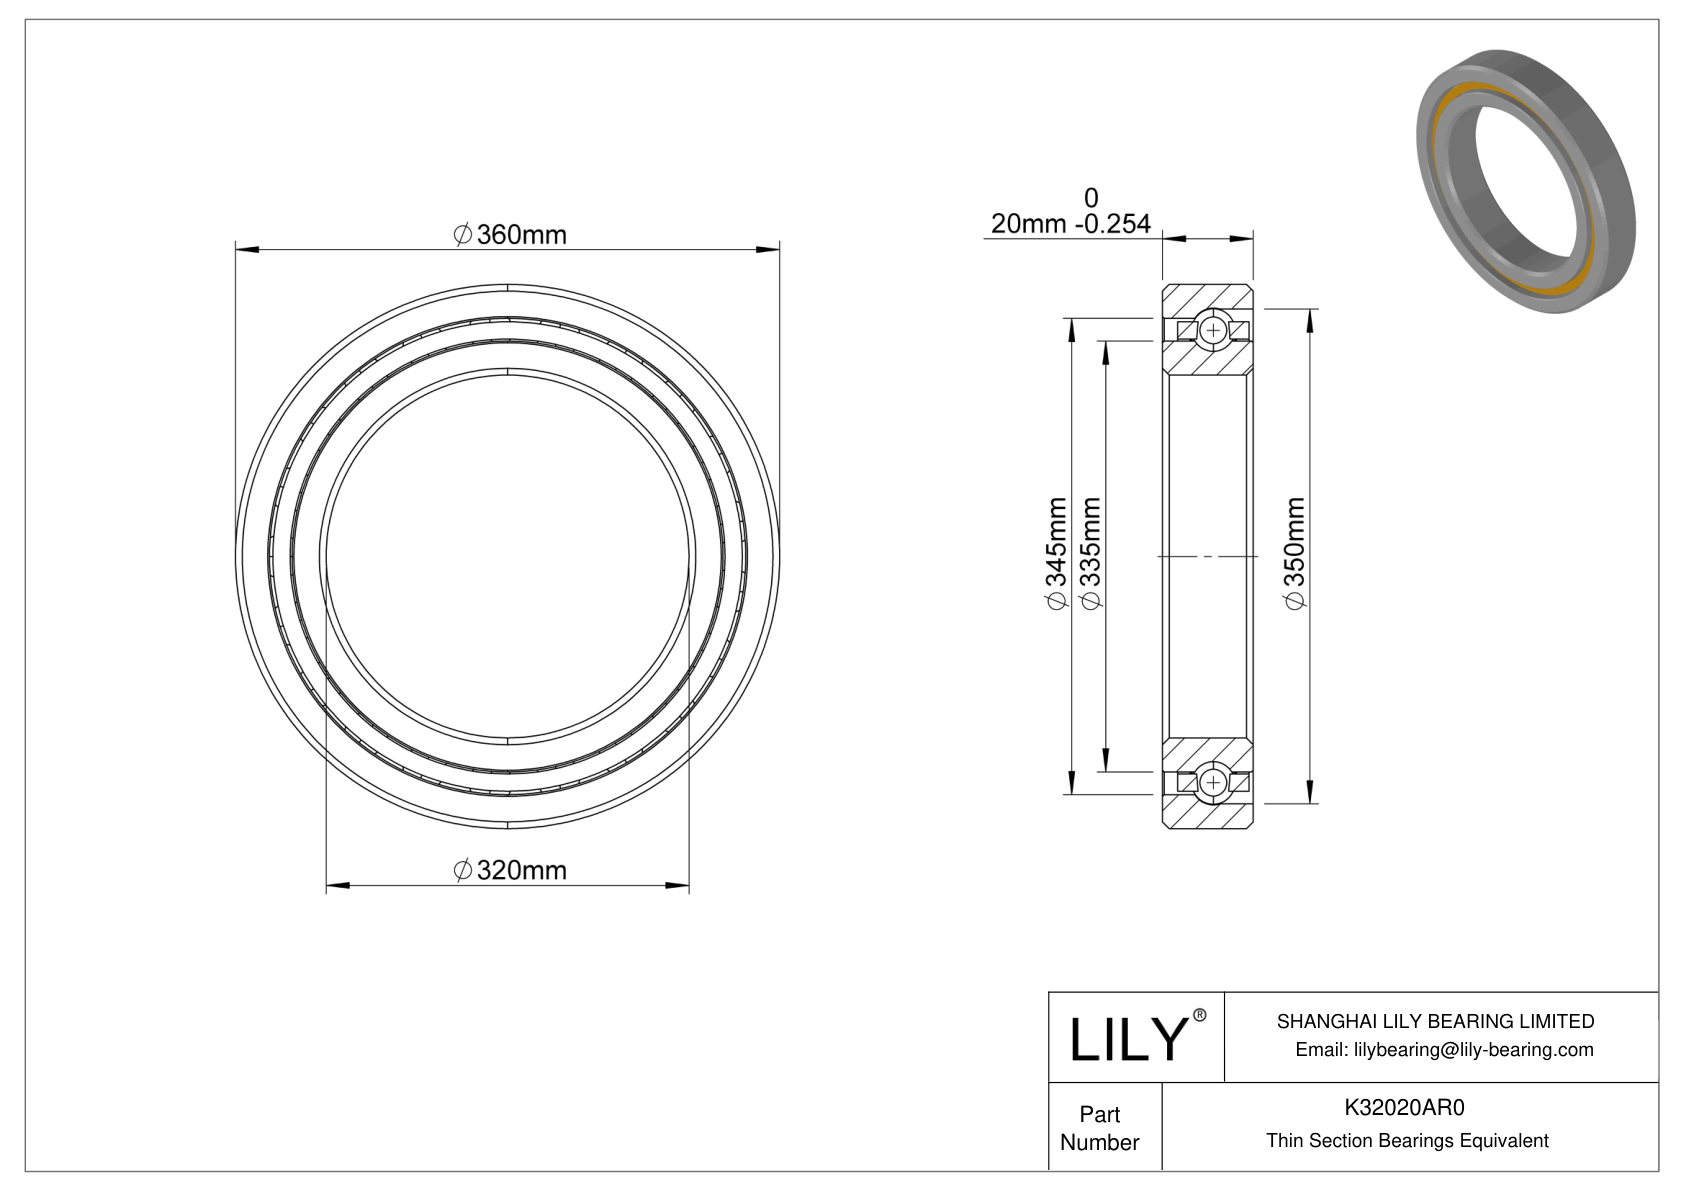 K32020AR0 Constant Section (CS) Bearings cad drawing